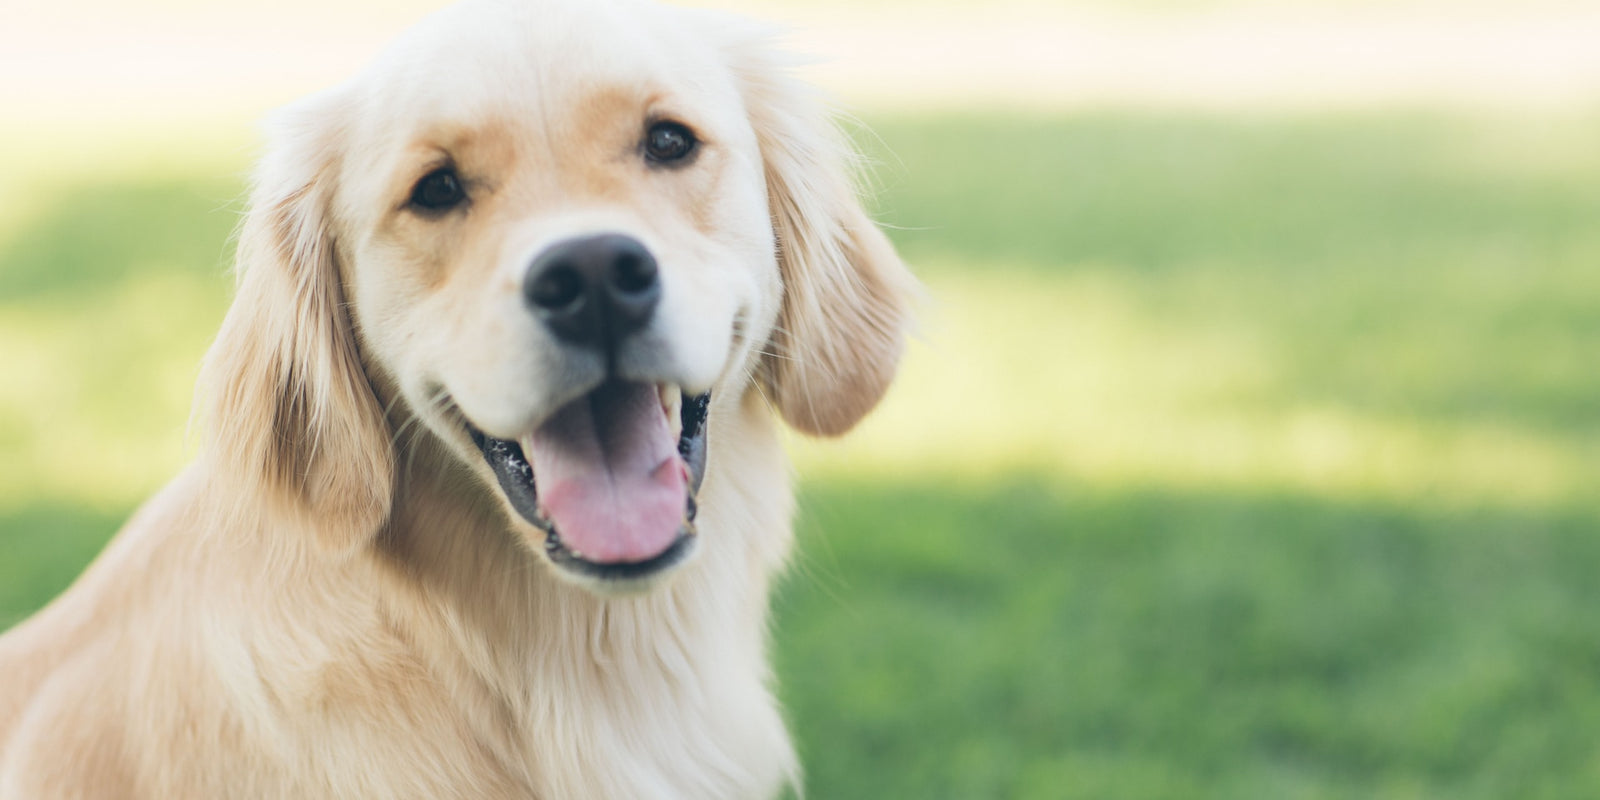 10 Essential Steps to Achieve Radiant Dog Skin and Coat Health